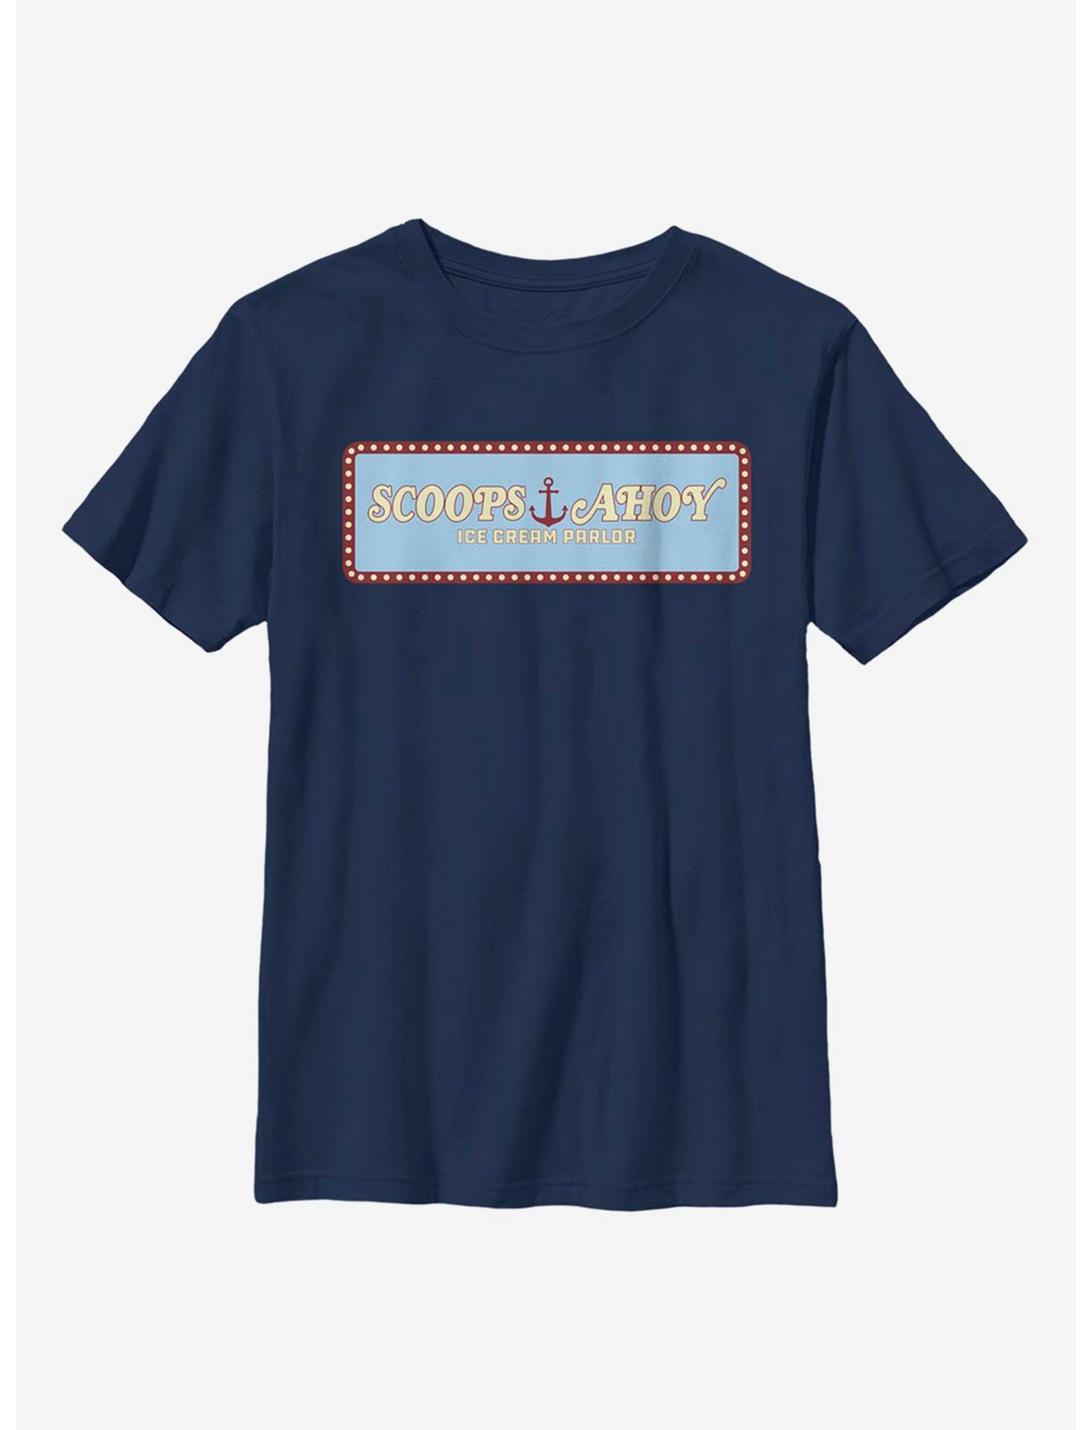 Stranger Things Scoops Ahoy Panel Youth T-Shirt, NAVY, hi-res